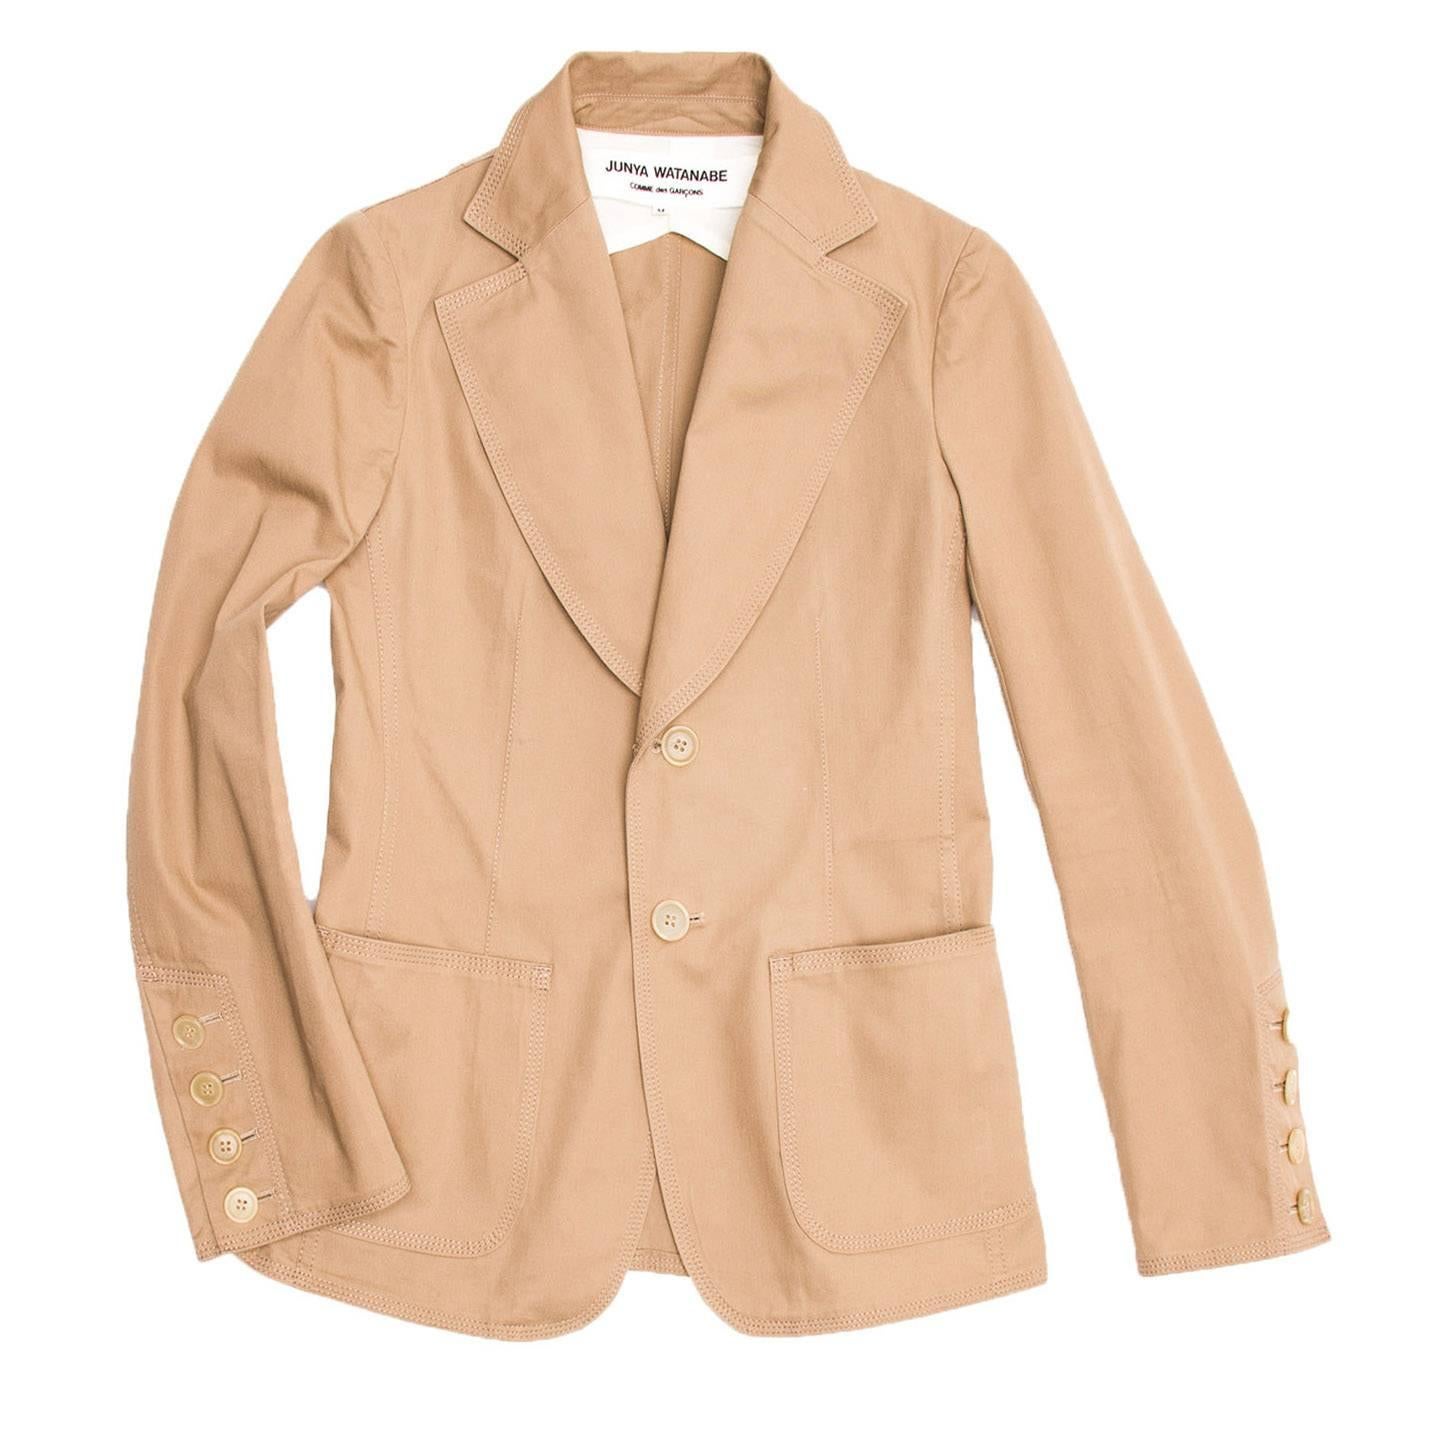 Tan cotton fitted blazer jacket with wide lapel. Patch pockets applied at front. Cuffs opening with four cream color buttons. Top stitches tone on tone decorate seams and profiles. Designed for Comme des Garçons.

Size  M Univarsal sizing

Condition